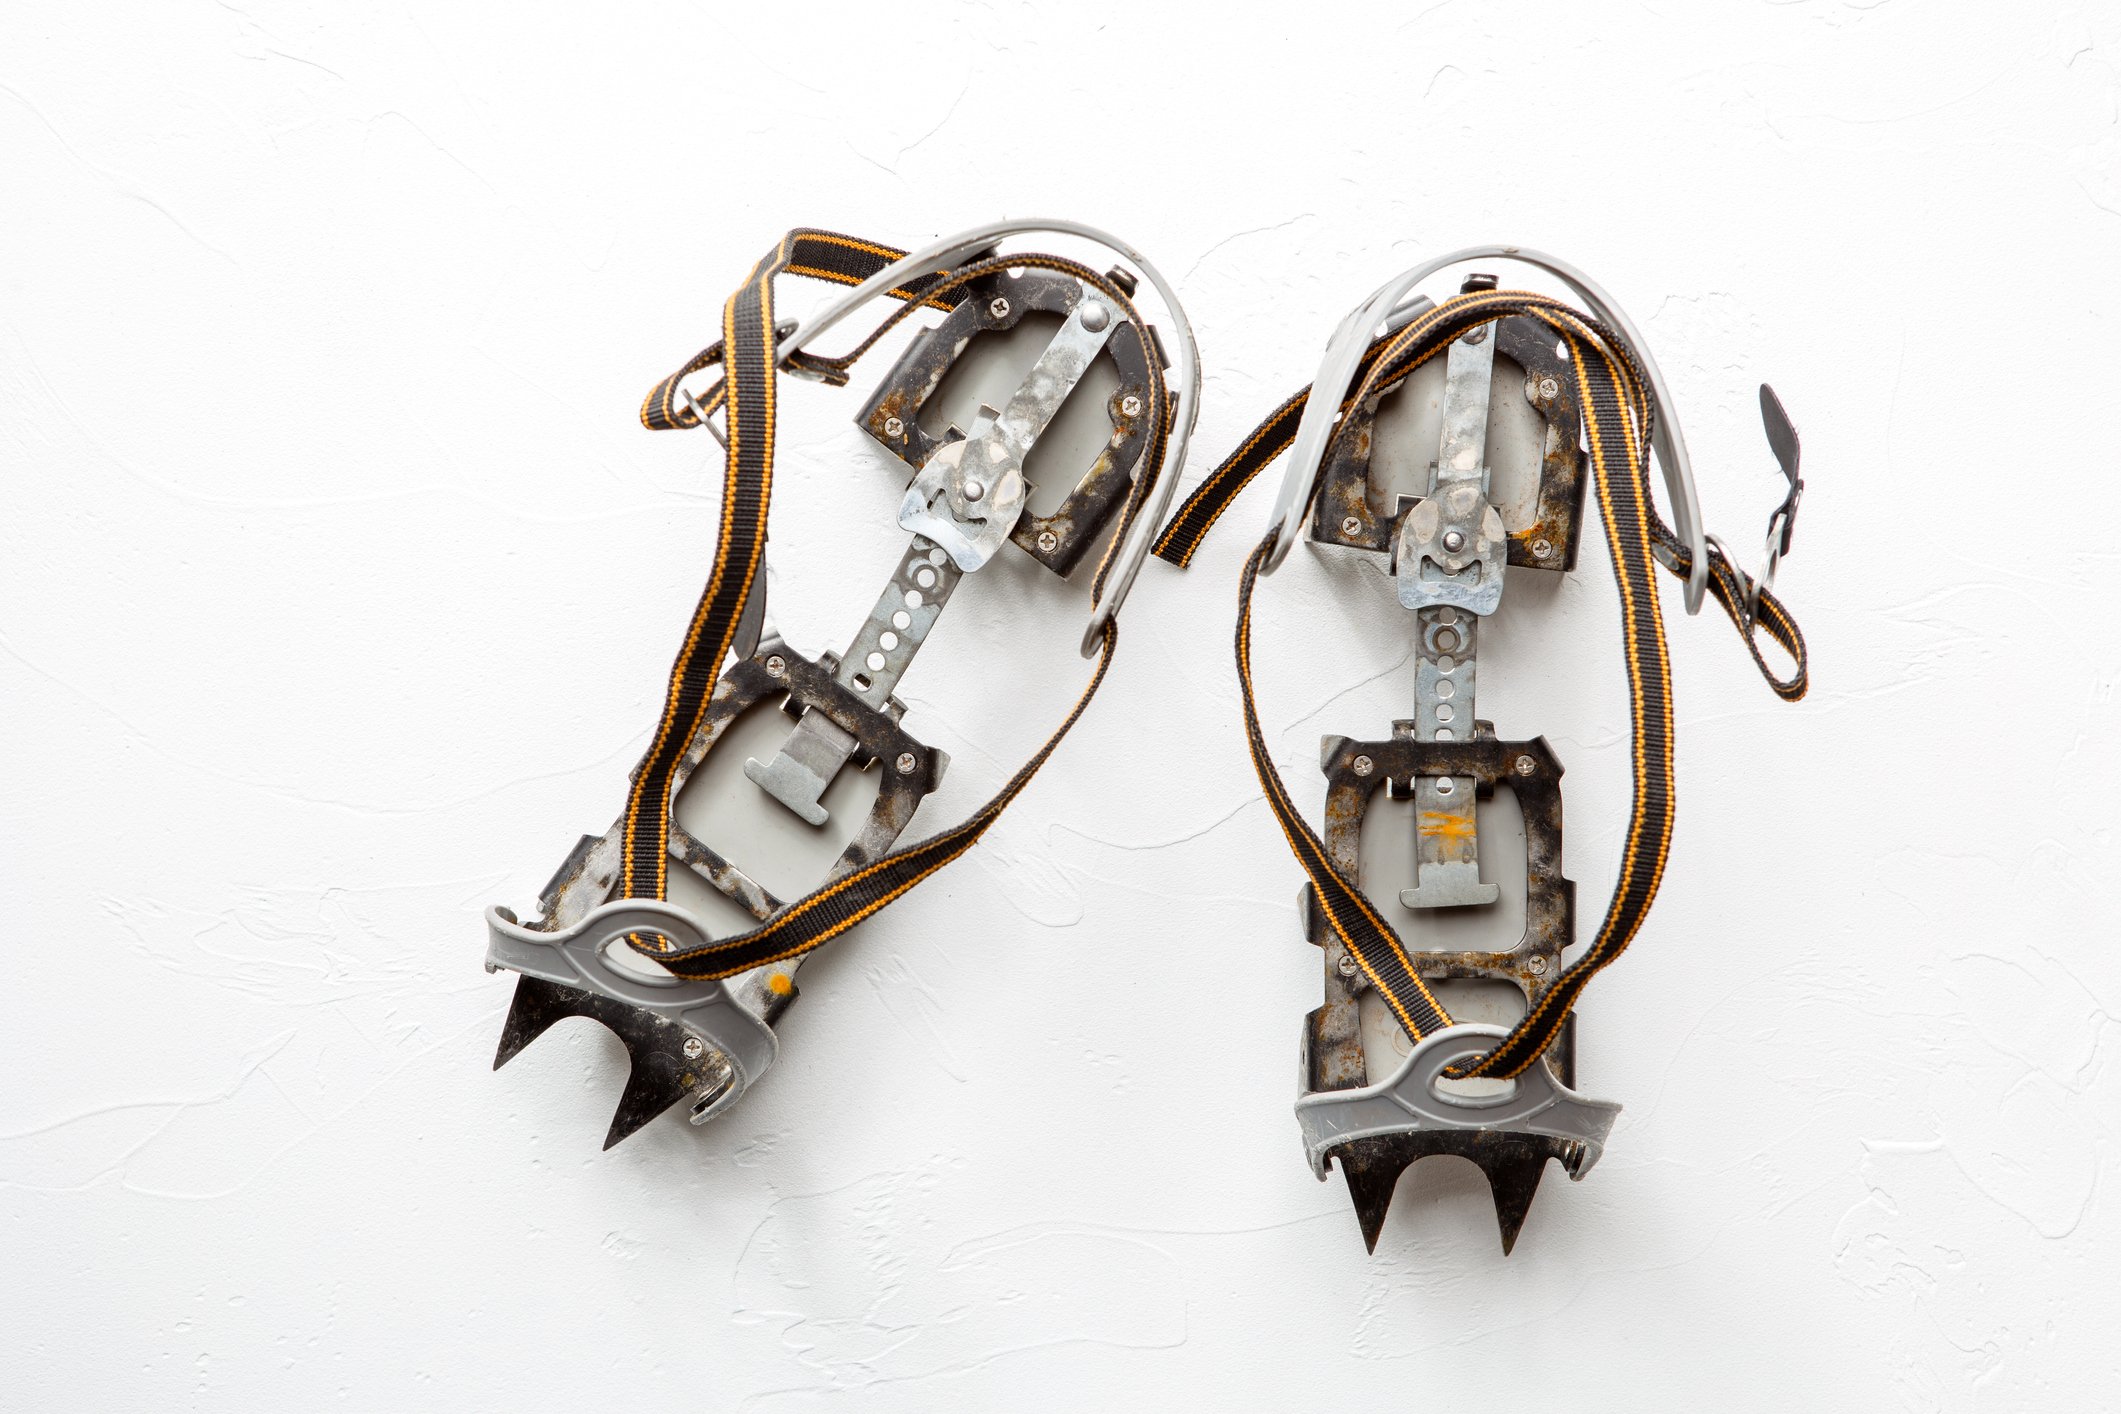 C1 crampons without hiking boots